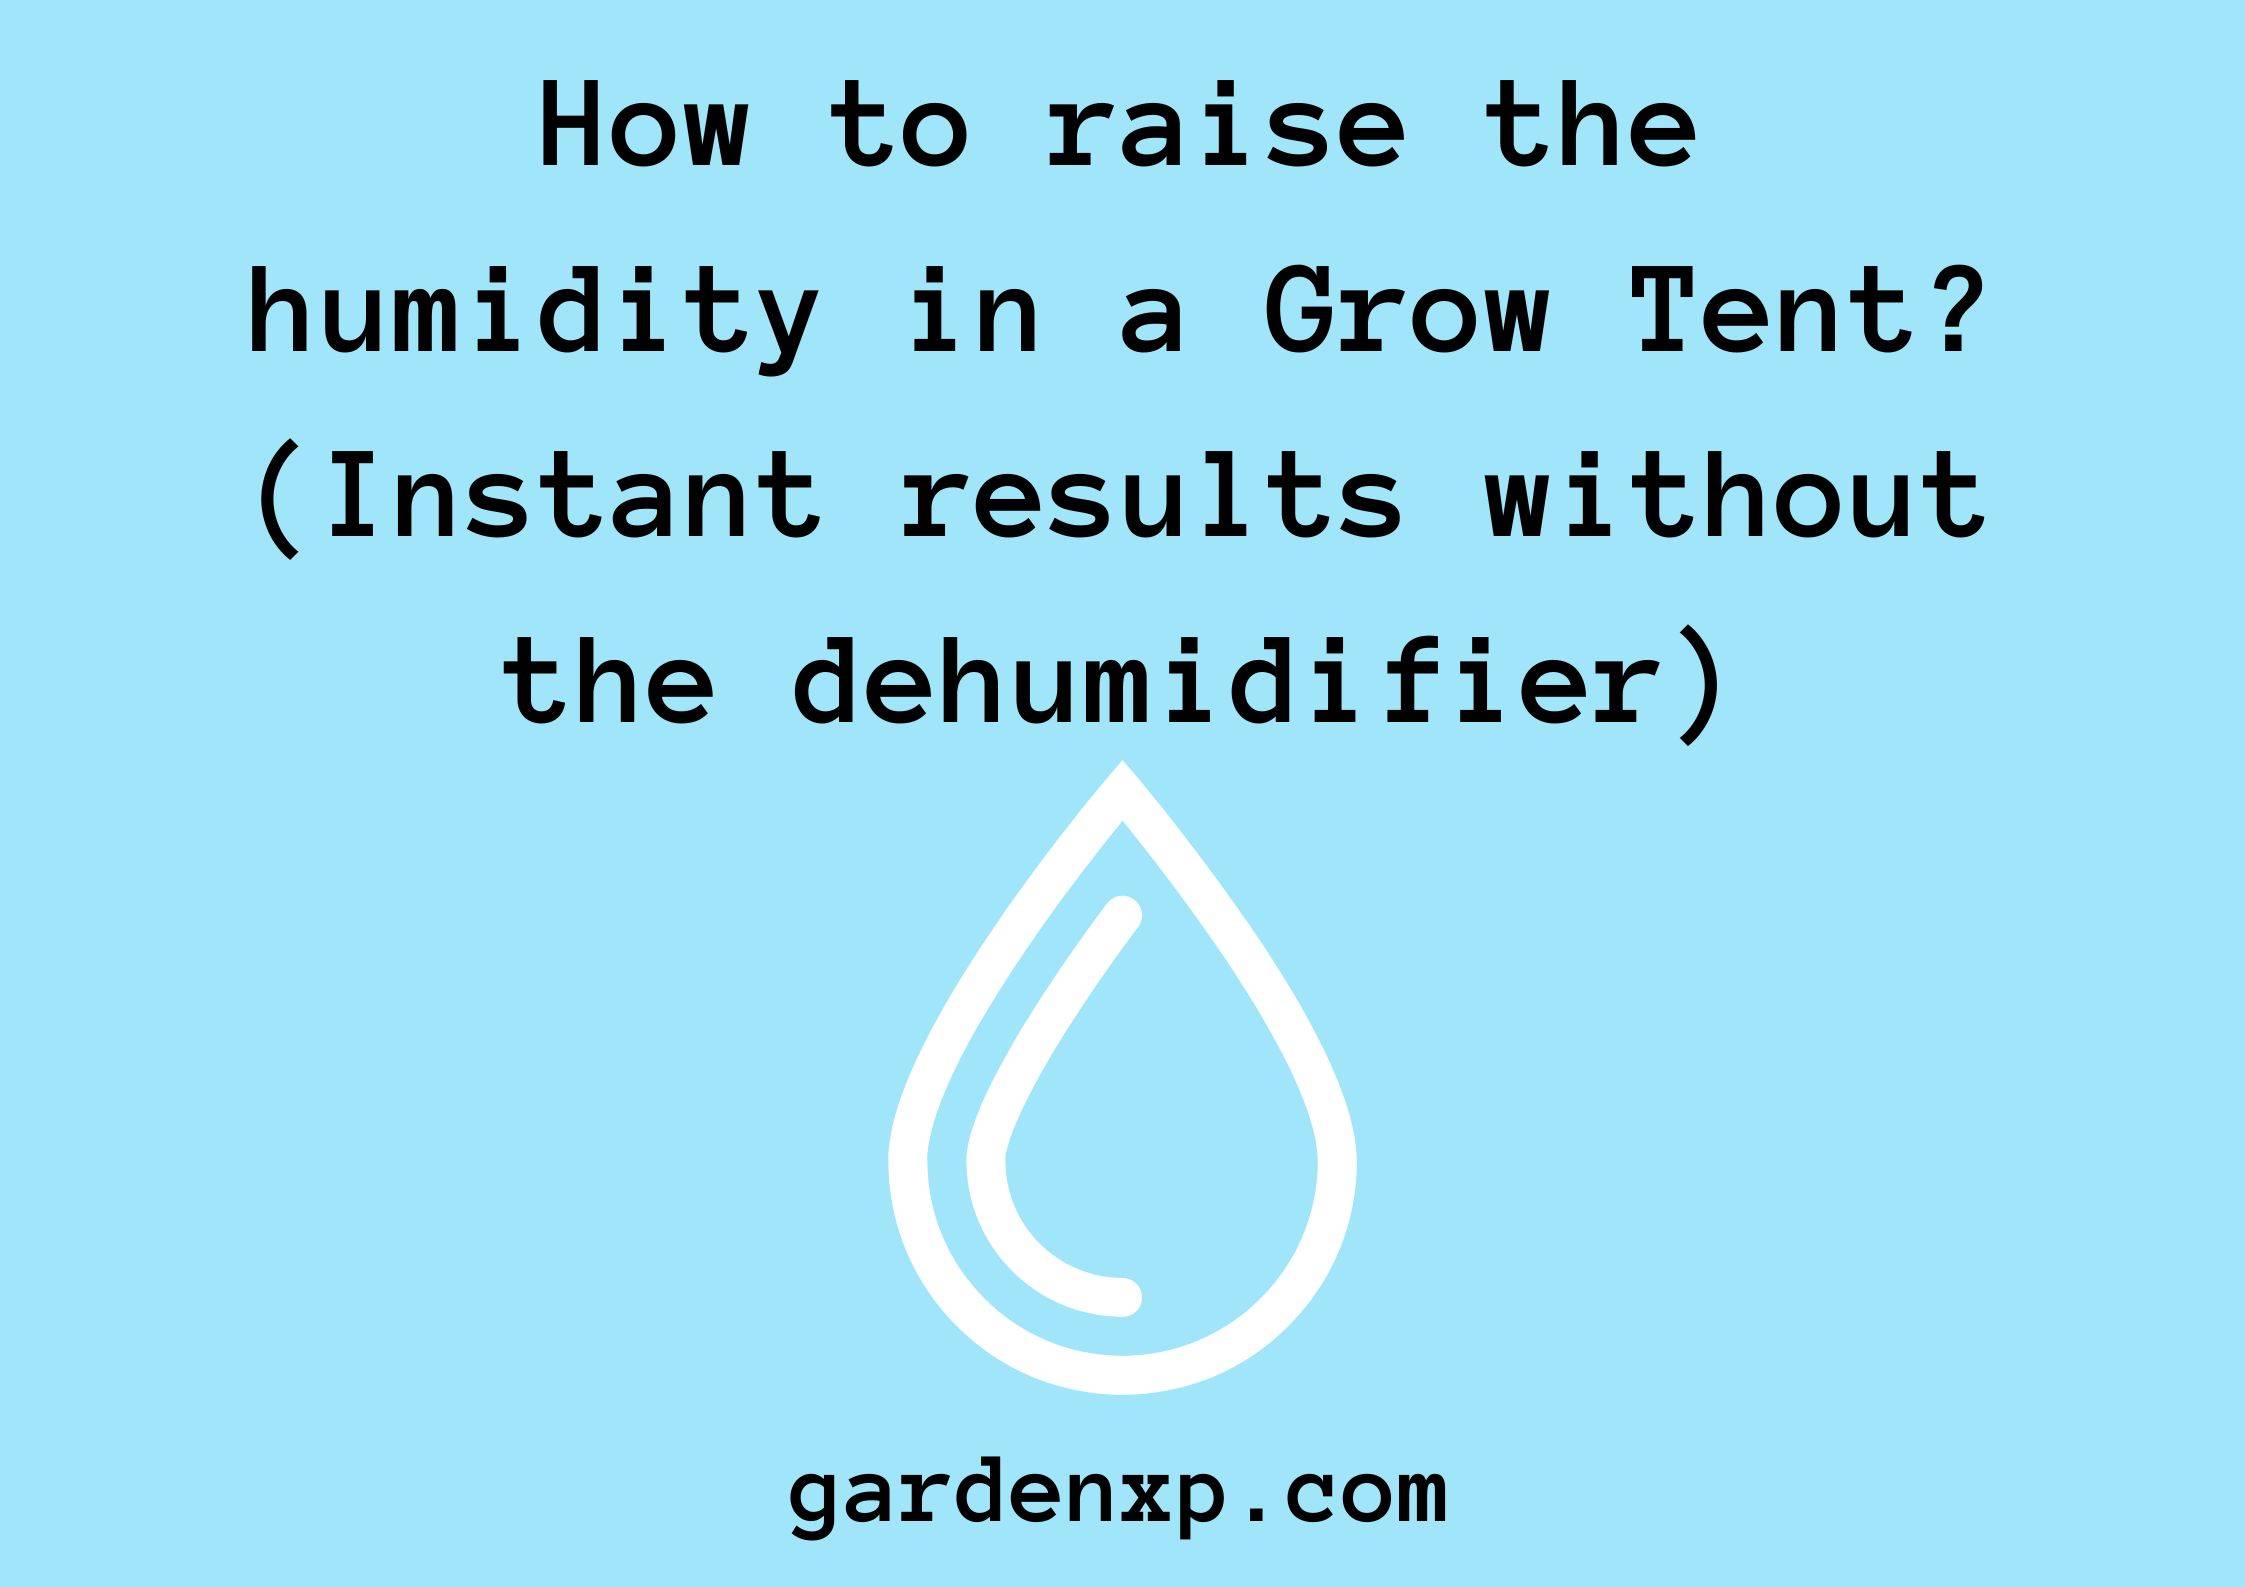 How to raise the humidity in a Grow Tent? (Instant results without the dehumidifier)